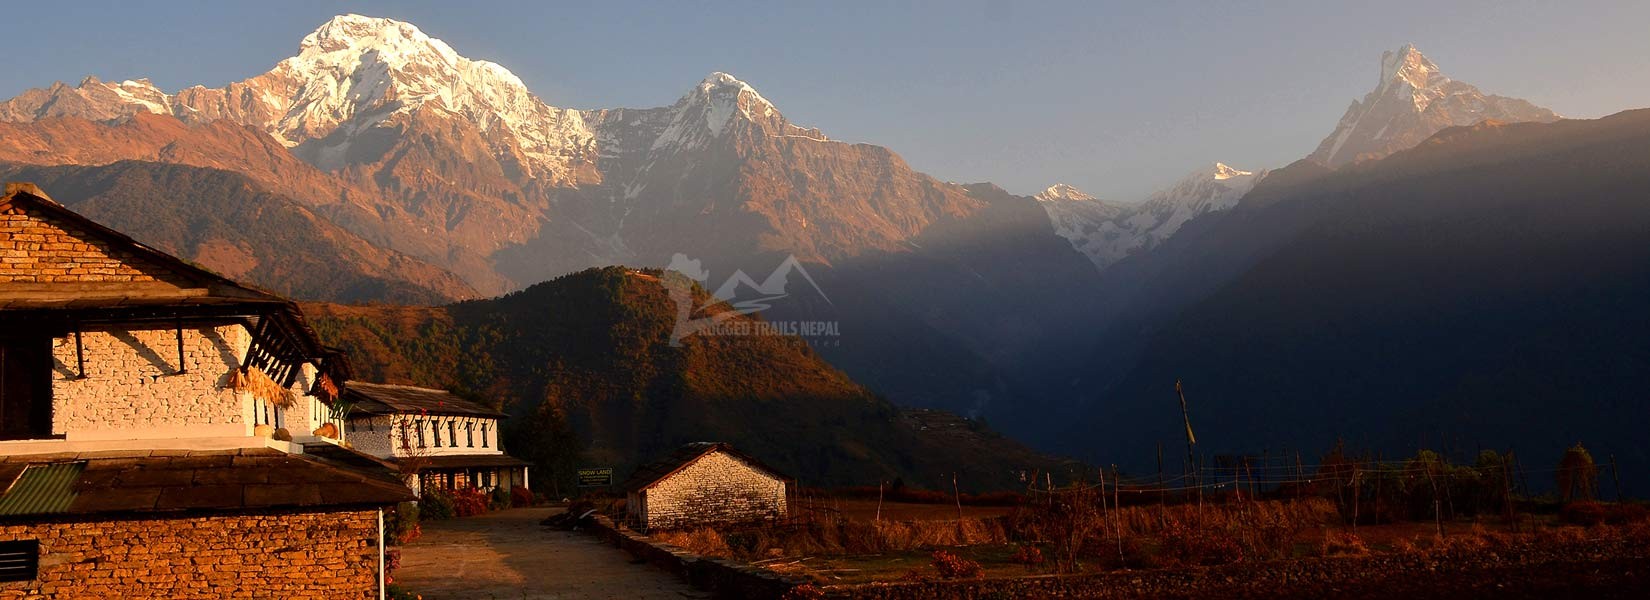 best small town in the world to visit ghandruk village